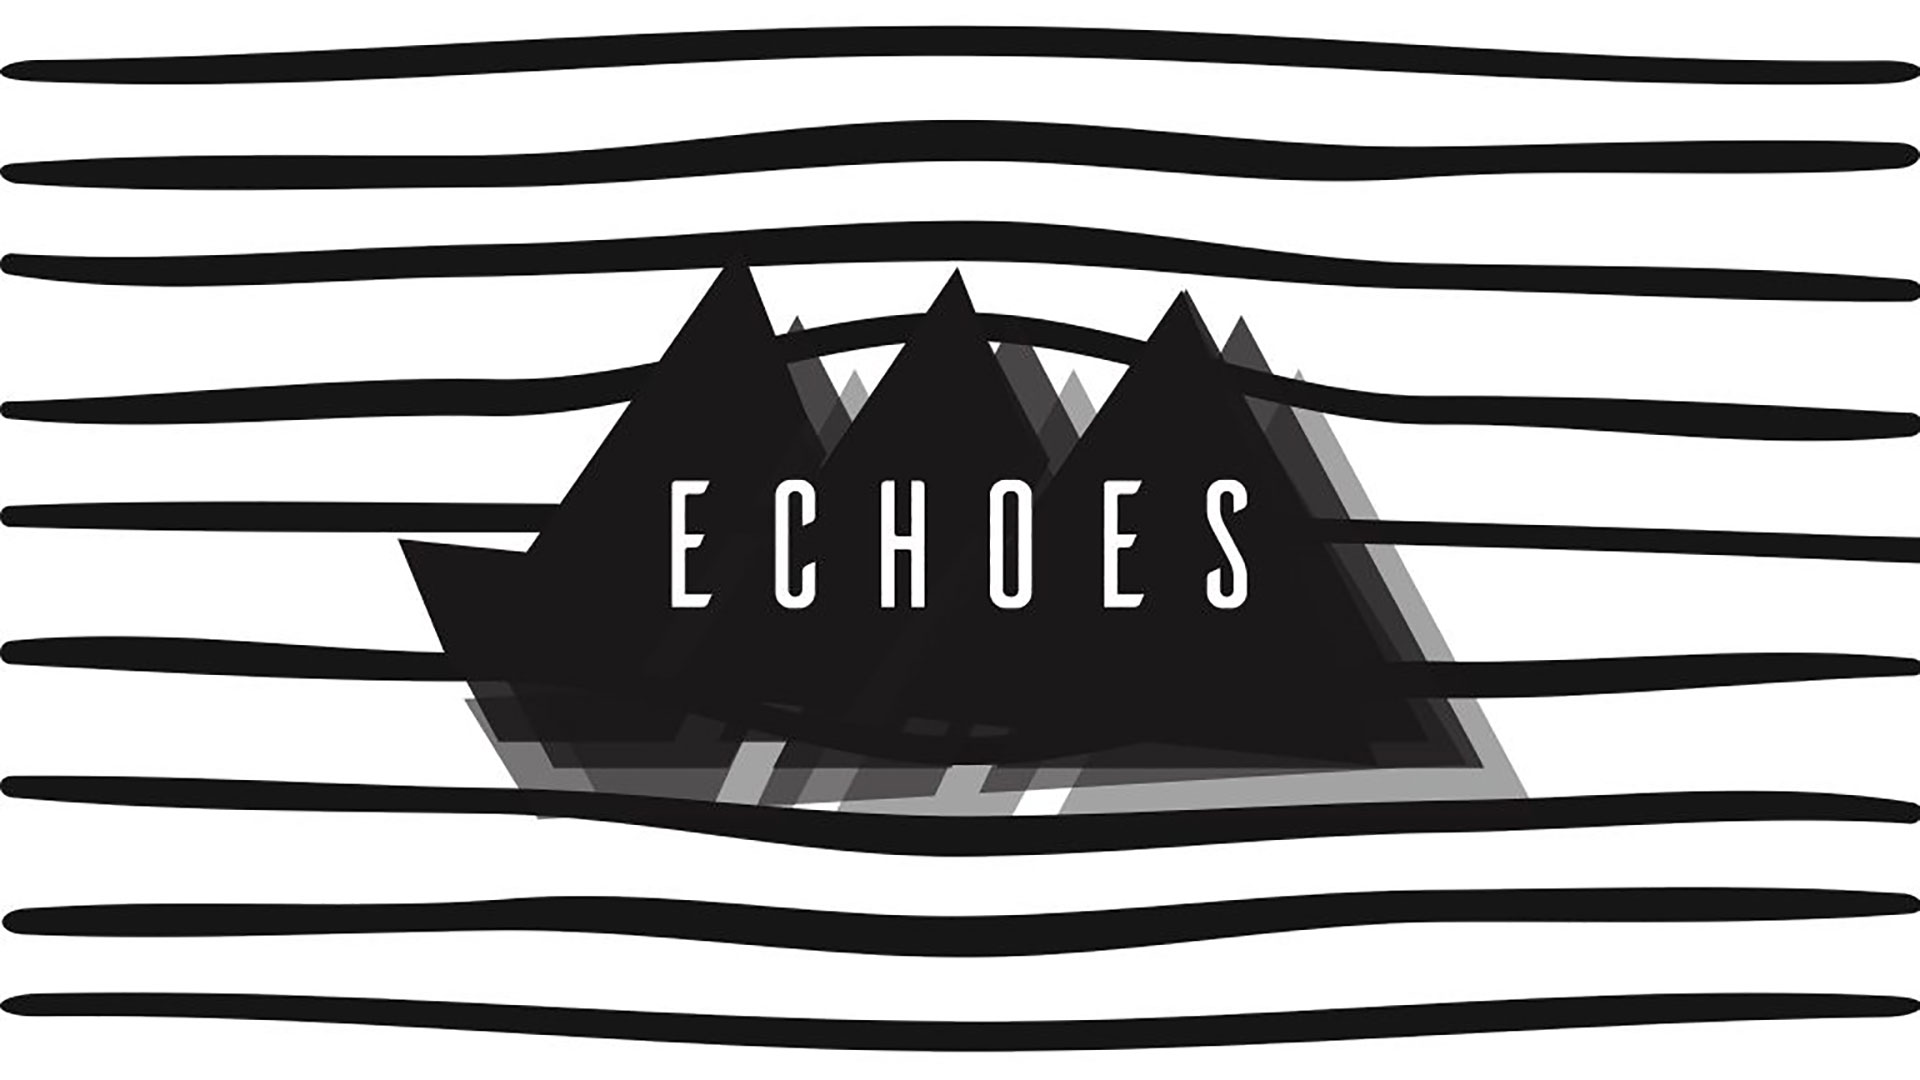 Series: Echoes